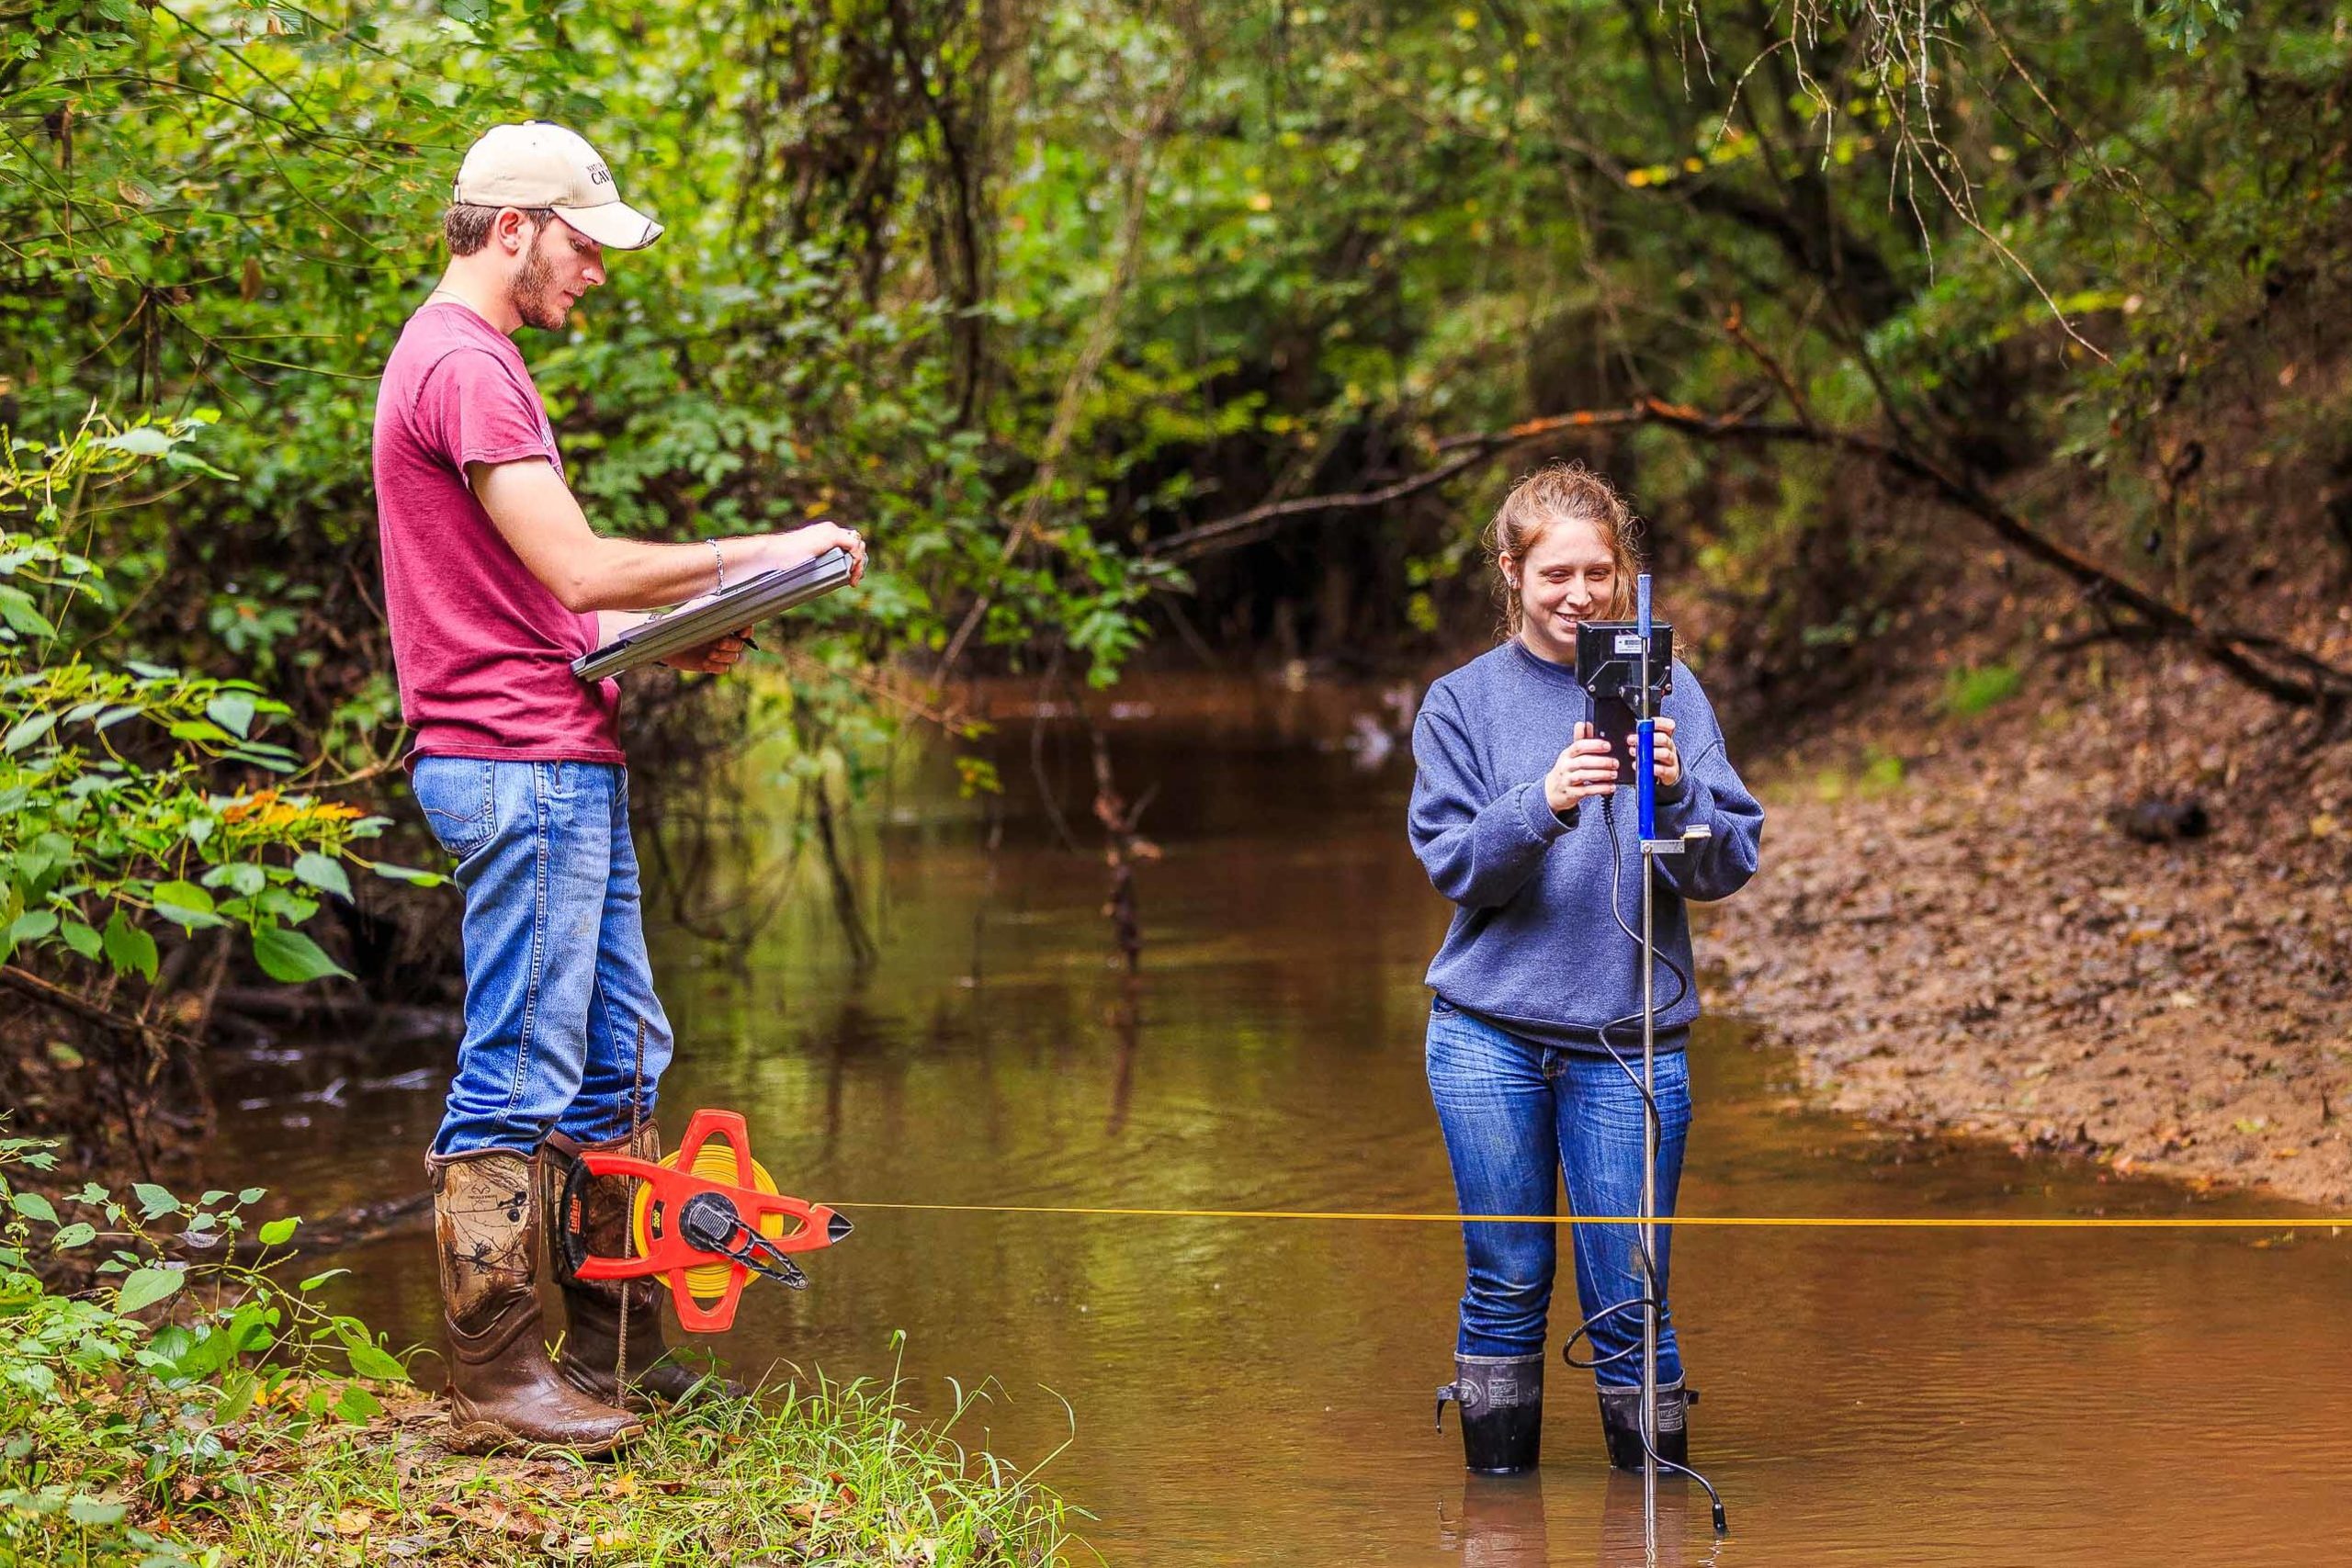 A woman wearing a blue sweatshirt, blue jeans, and knee-high waders stands in the middle of a shallow creek and is looking at a device that is attached to the top of a stick. This is Stephanie deVilleneuve. On the bank of the creek on the left side of the photo, a  man wearing a white baseball cap, red t-shirt, blue jeans and cowboy boots is taking notes on a clipboard. 